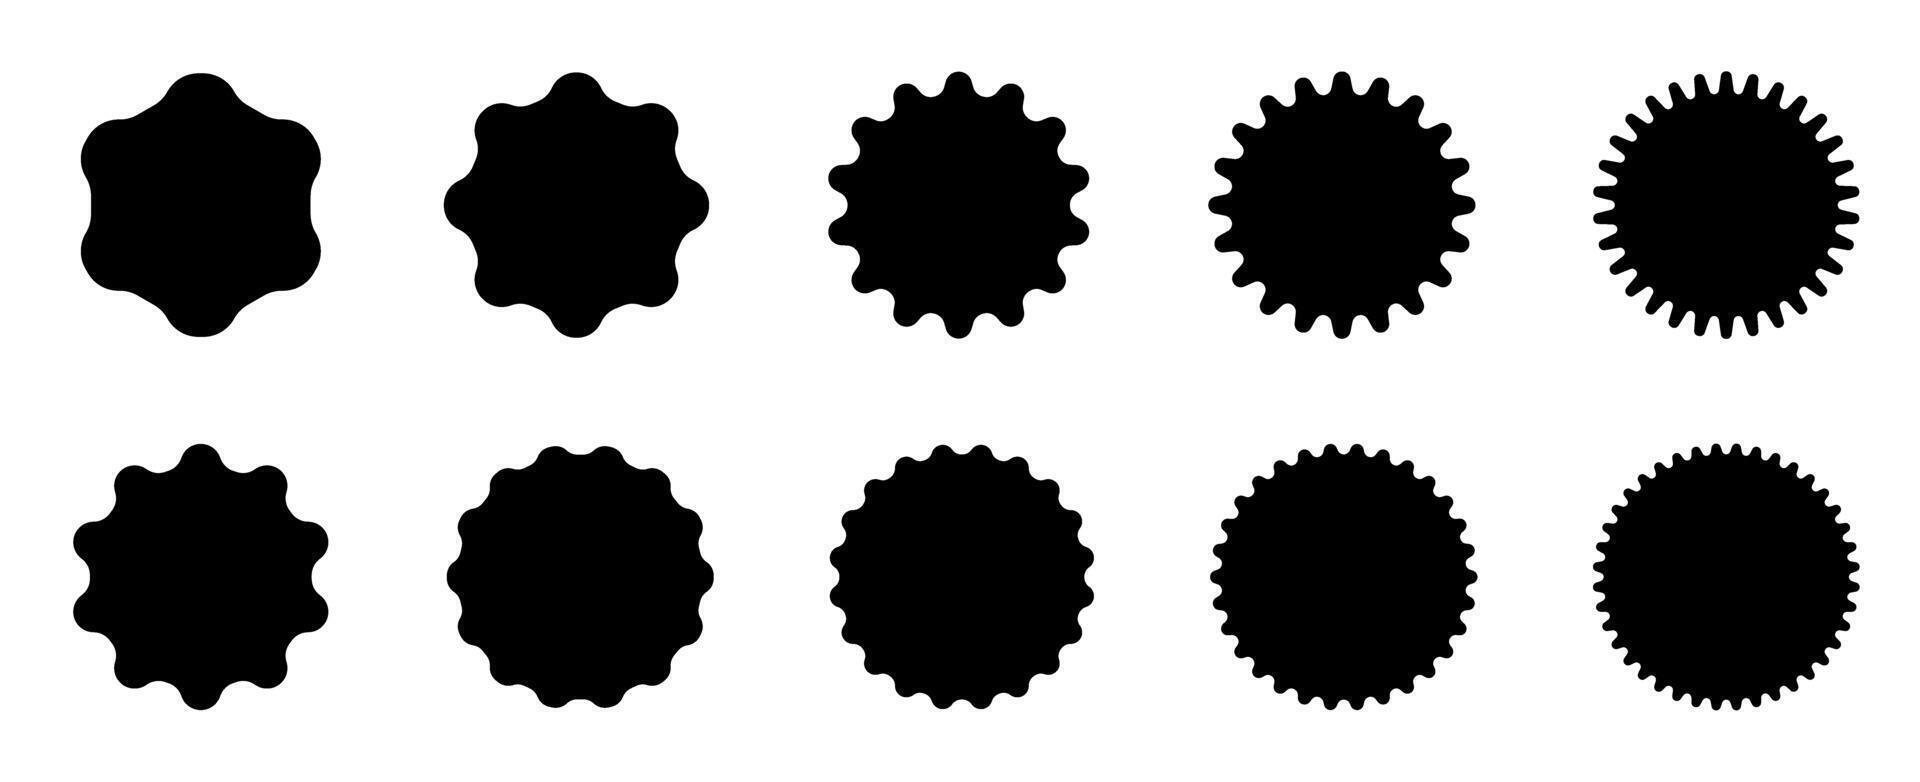 Black Ink Blots with Various Edges vector